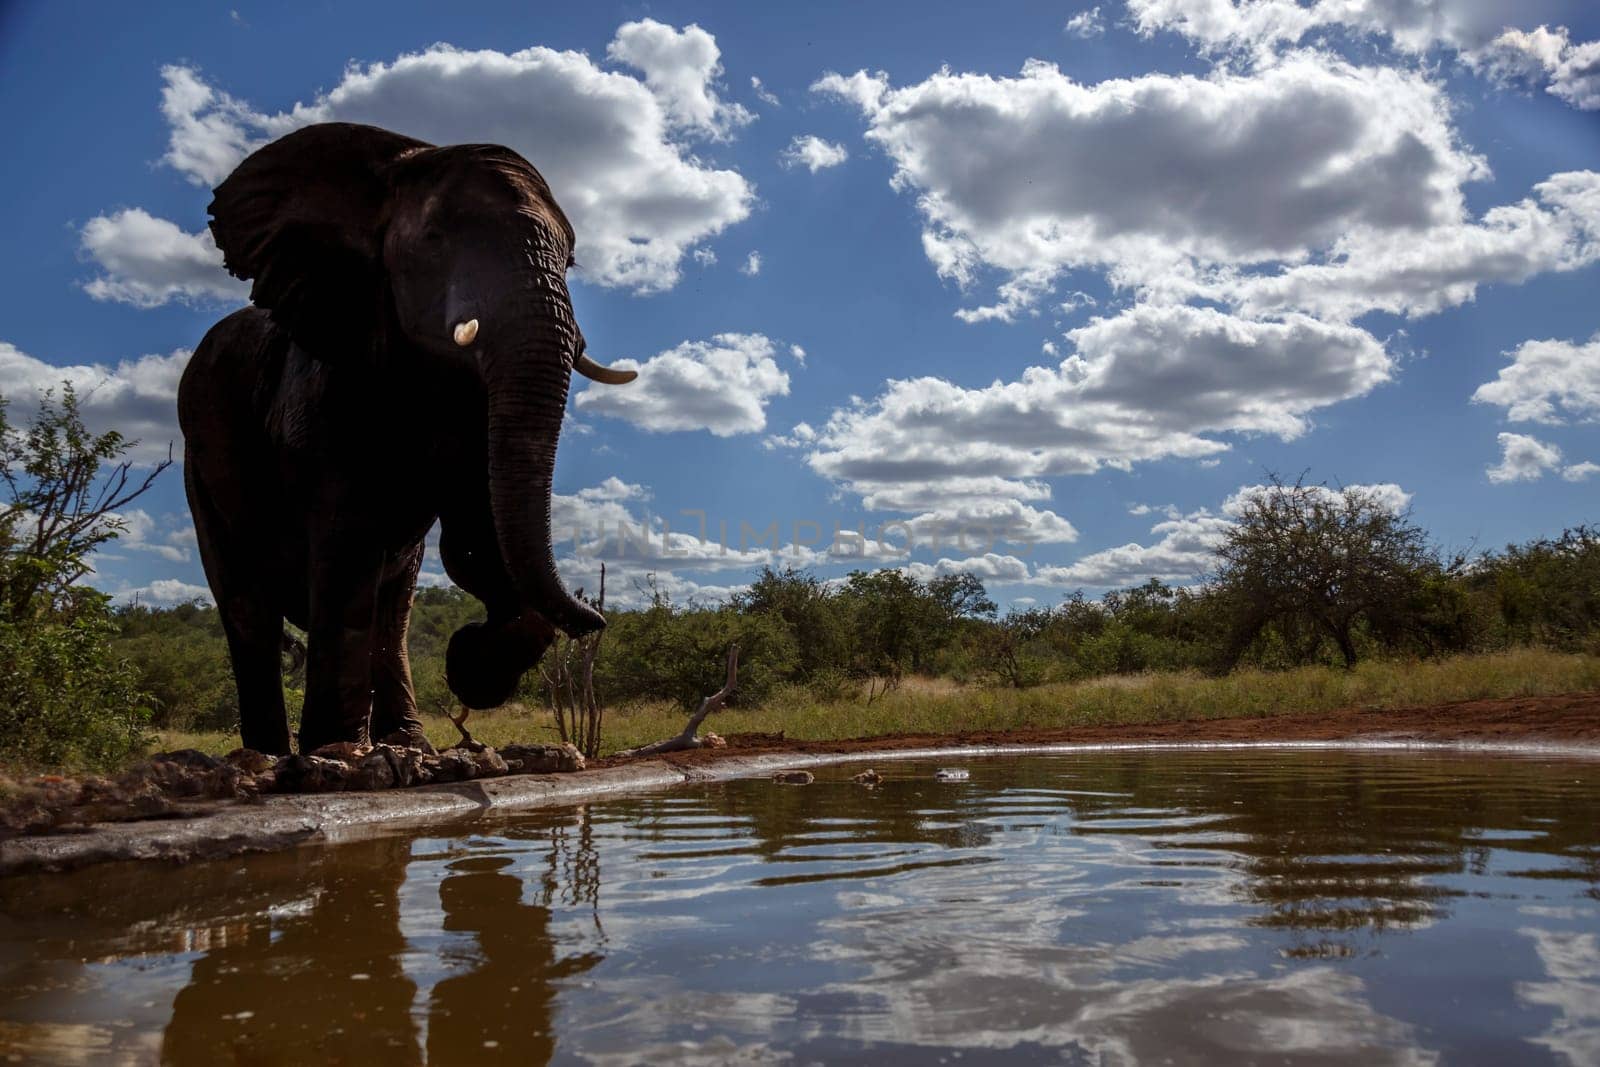 African bush elephant in wide angle view at waterhole in Kruger National park, South Africa ; Specie Loxodonta africana family of Elephantidae